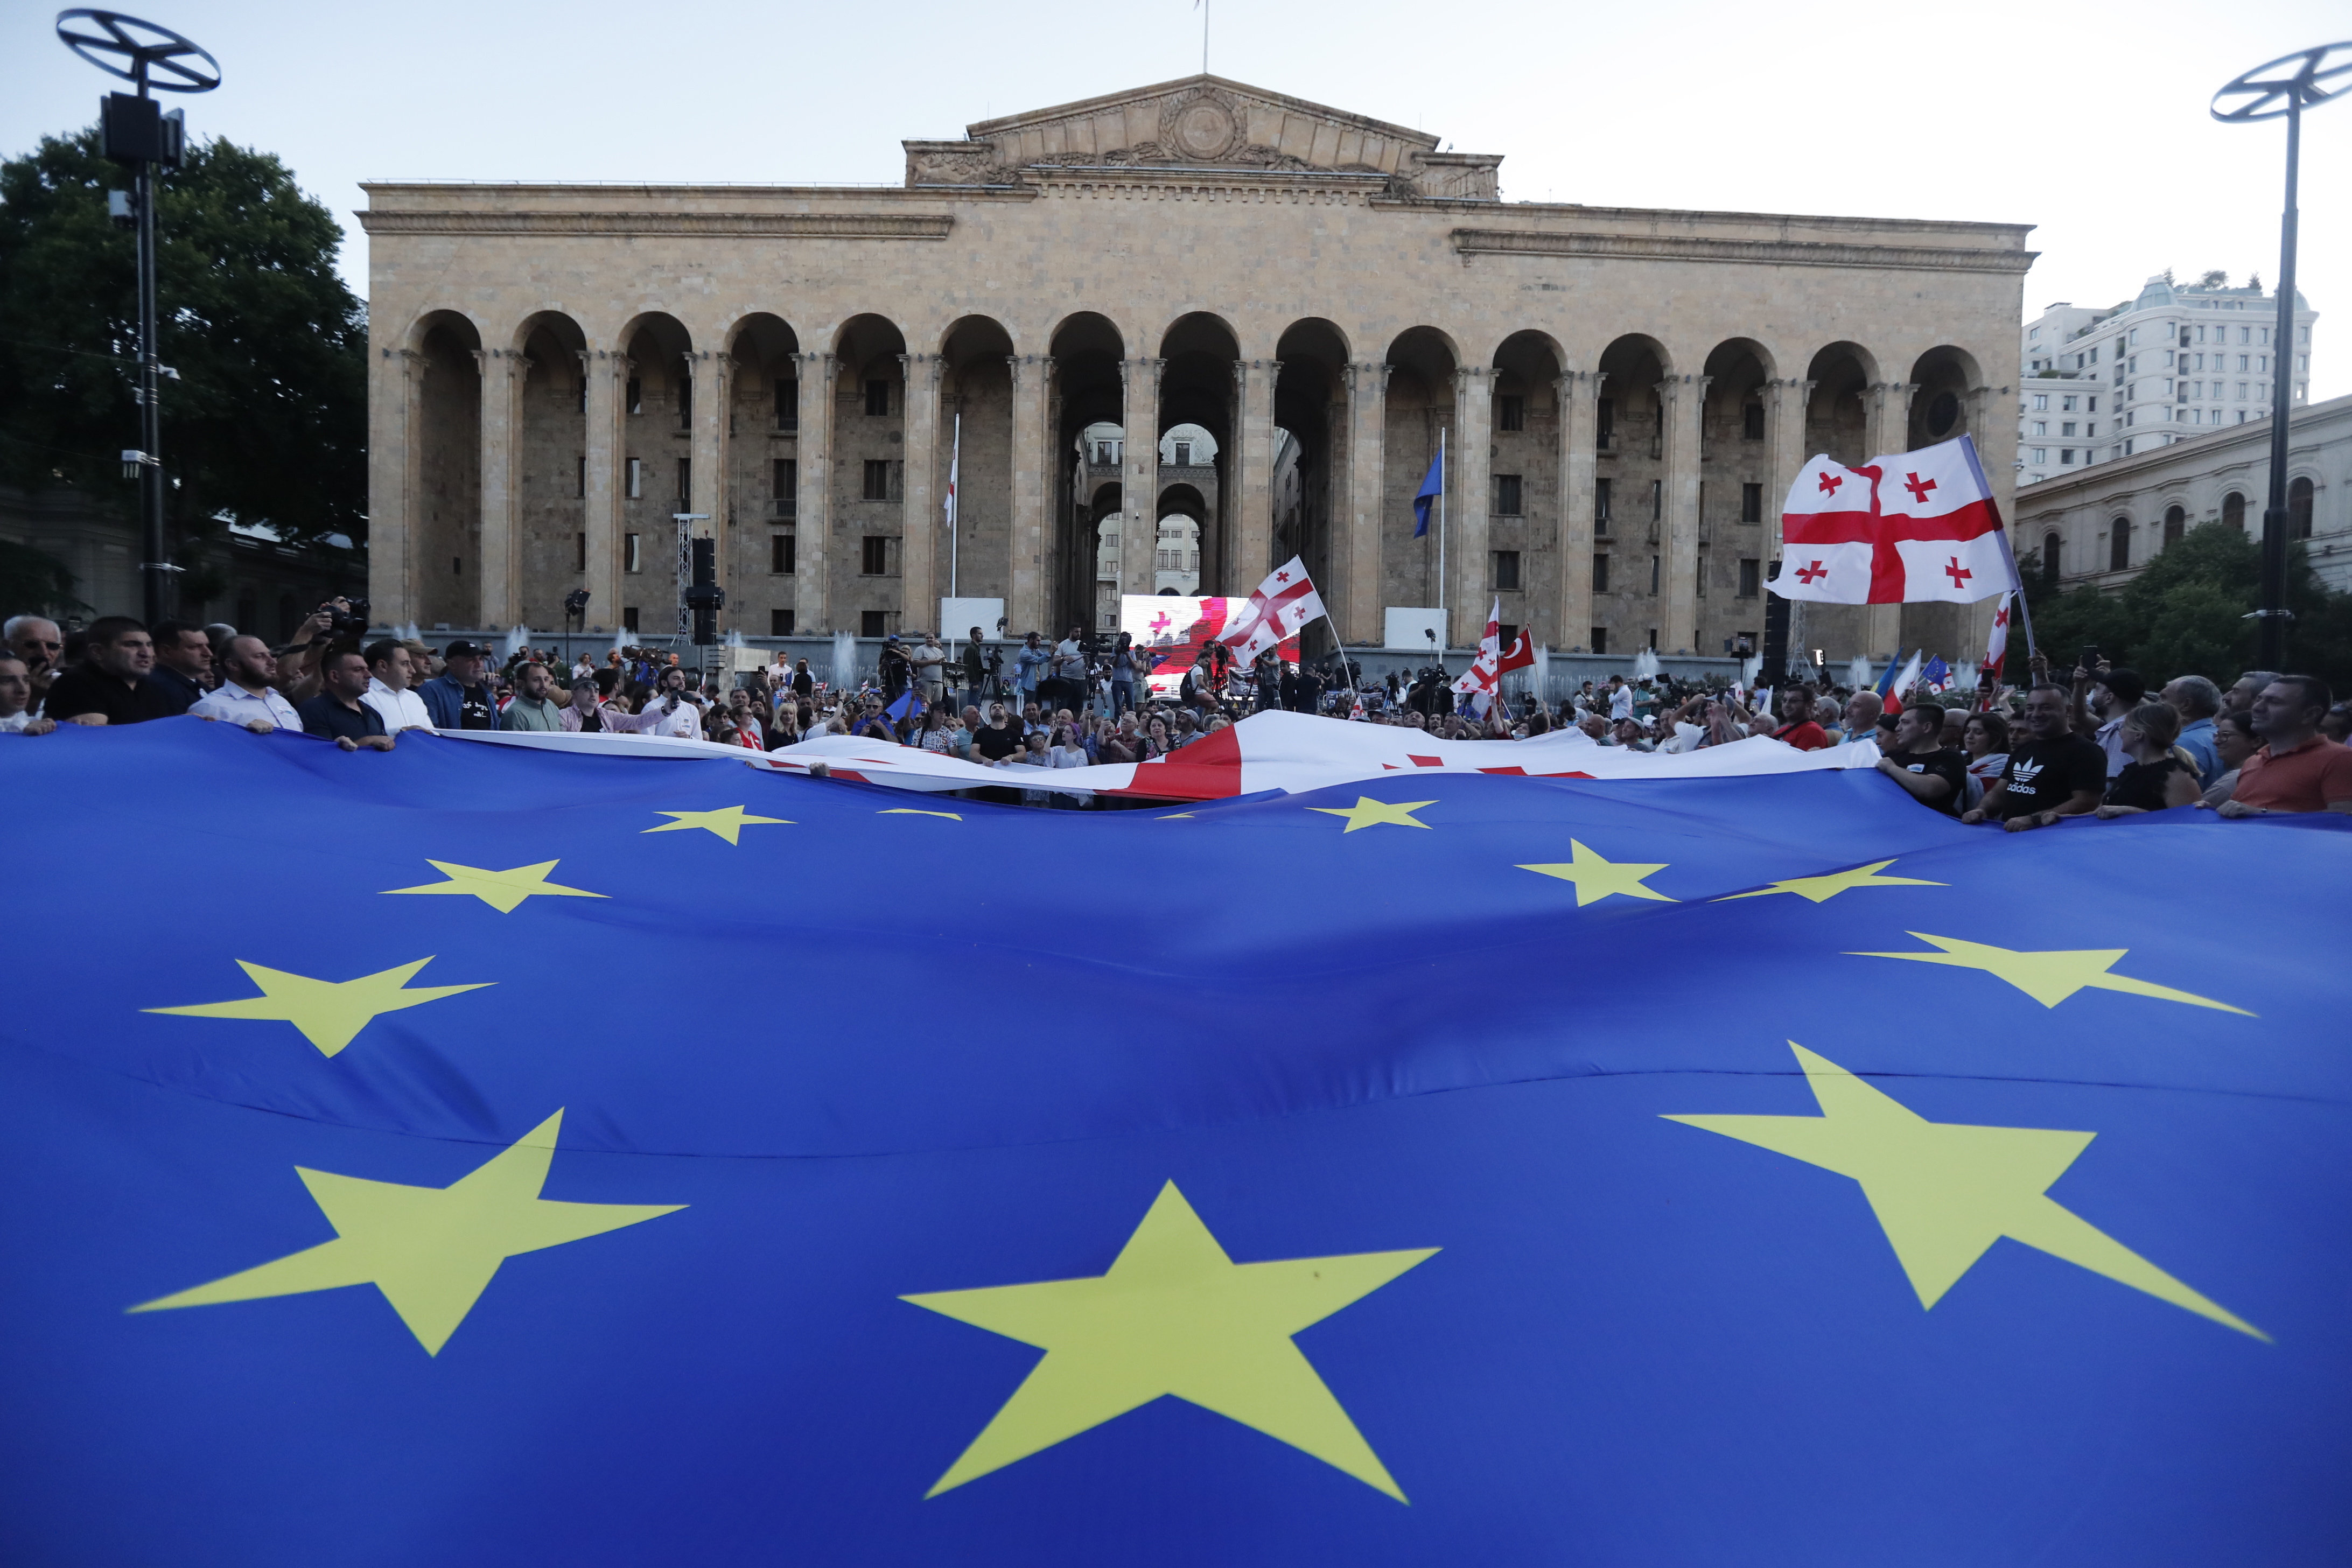 People attend a rally to support Georgia's membership in the European Union